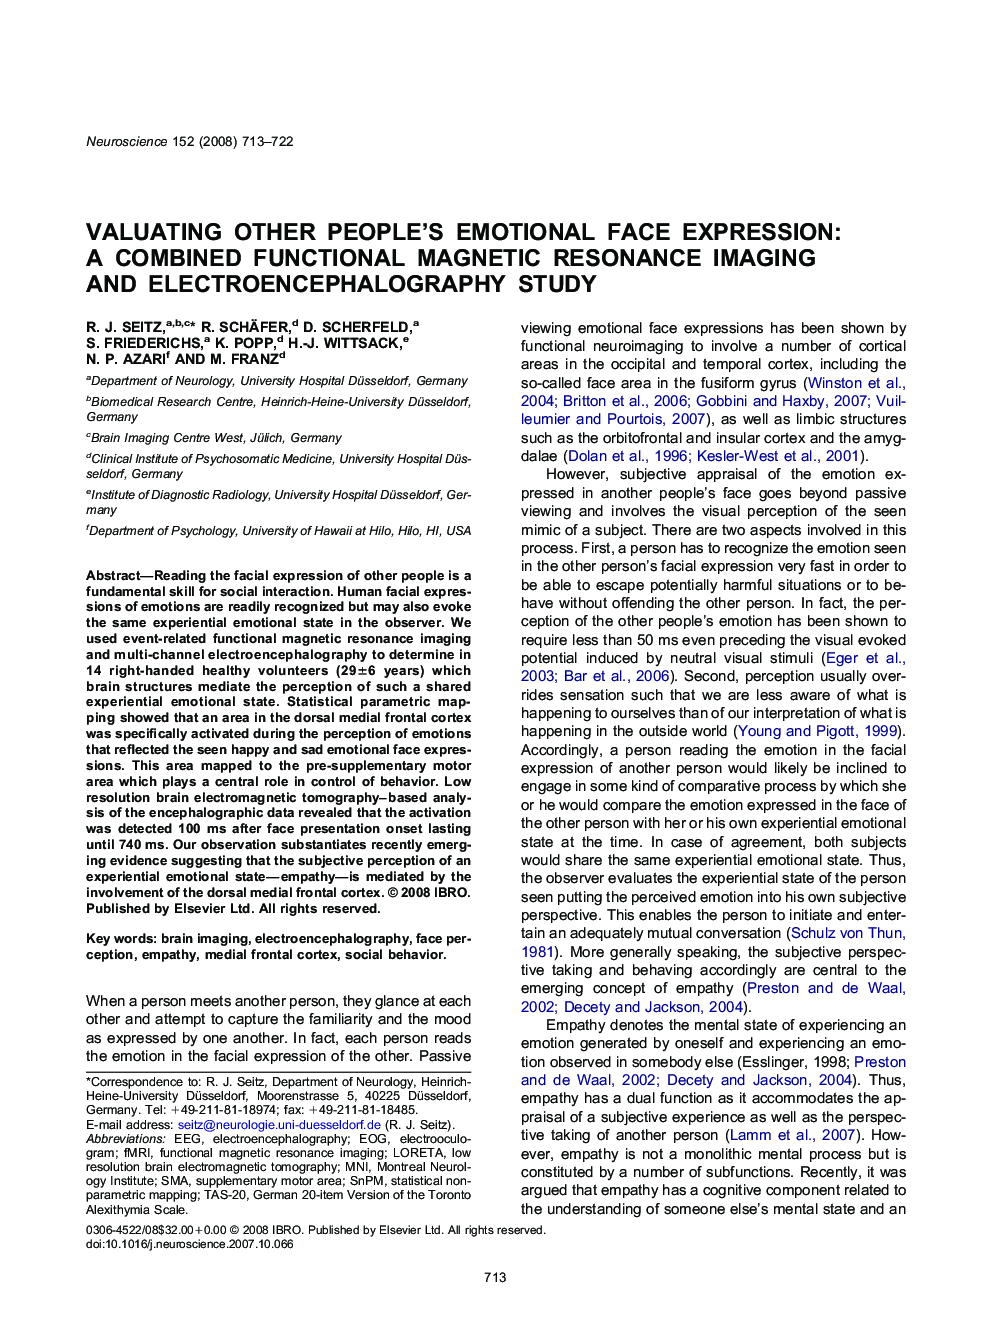 Valuating other people’s emotional face expression: a combined functional magnetic resonance imaging and electroencephalography study